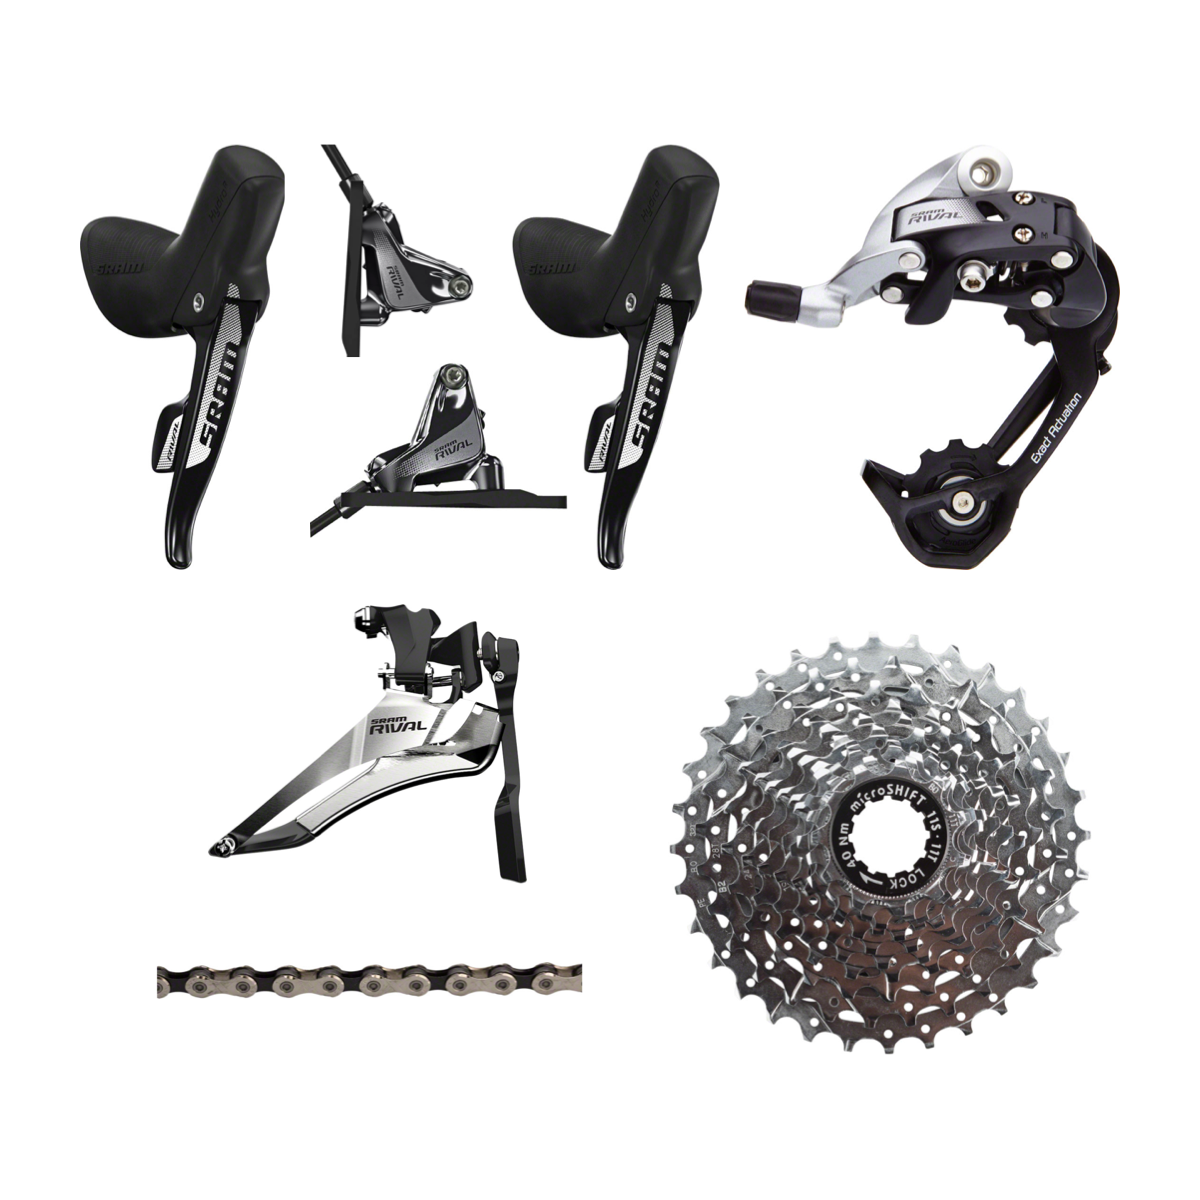 NEW SRAM Rival HRD Hydraulic Disc Groupset, 2x11 Speed, 11-32t, Flat Mount